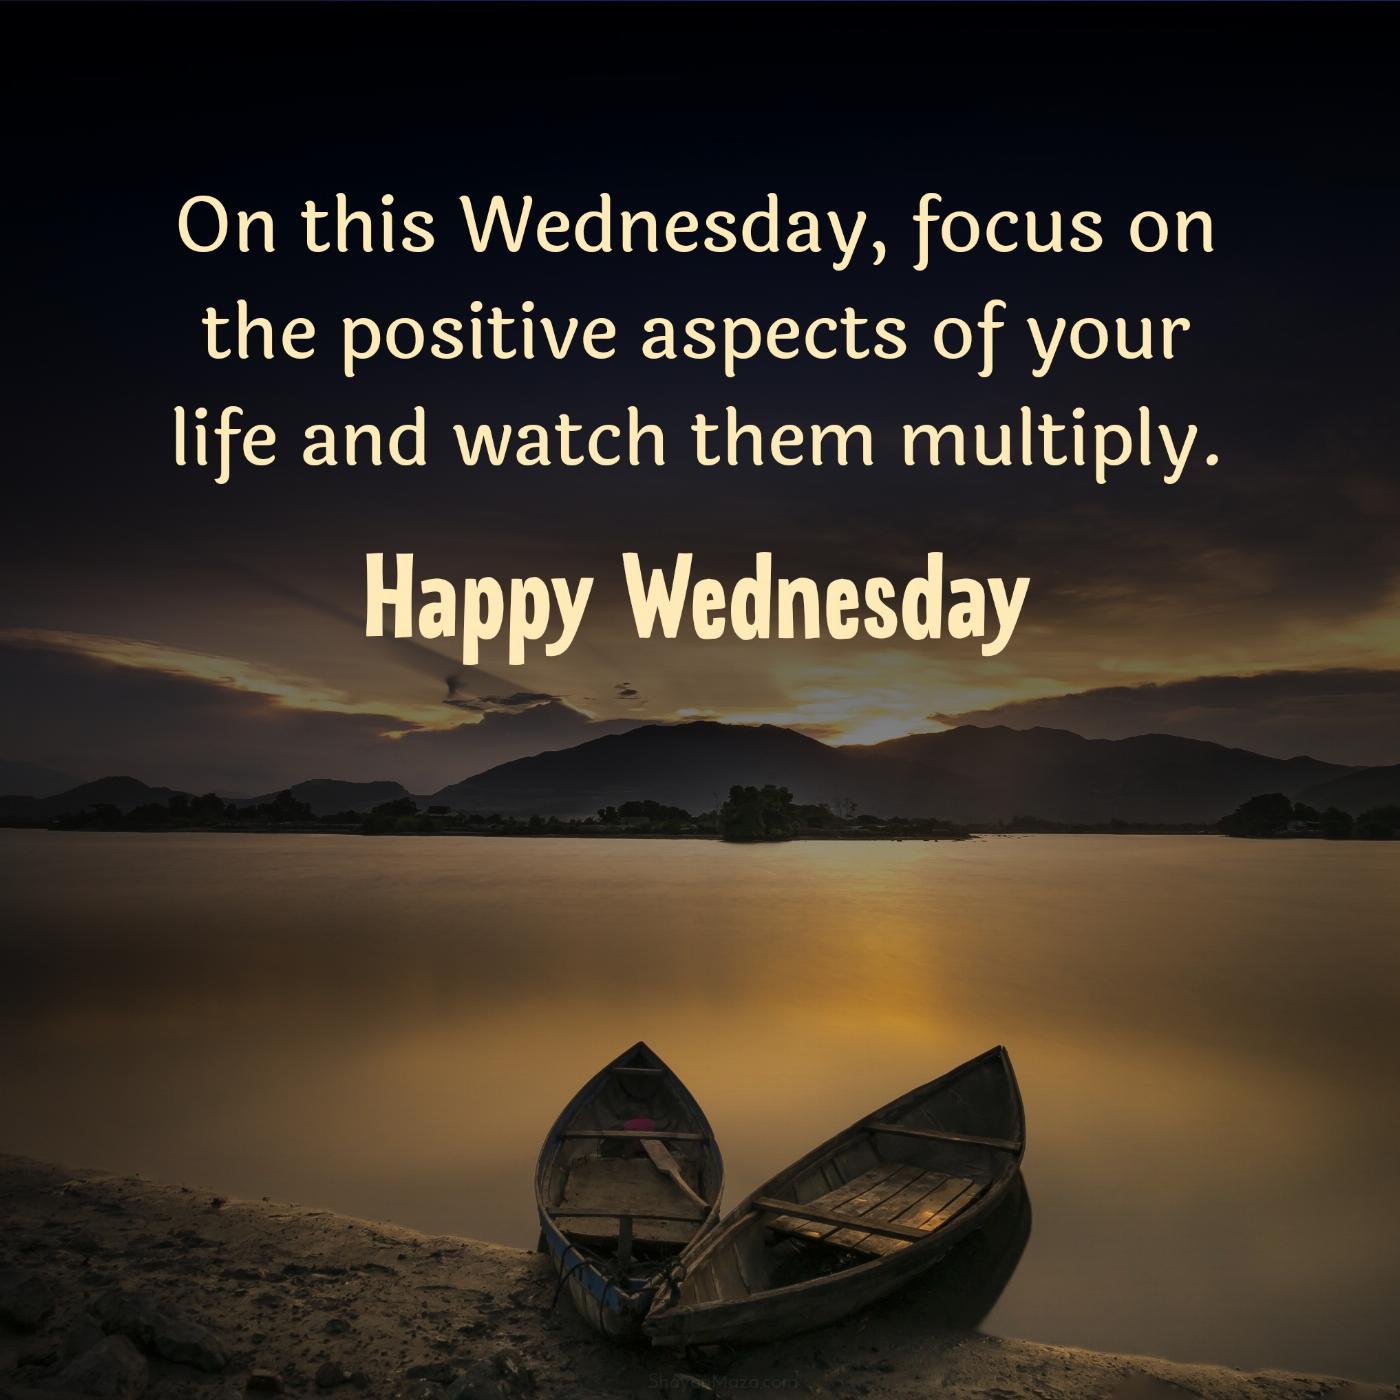 On this Wednesday focus on the positive aspects of your life